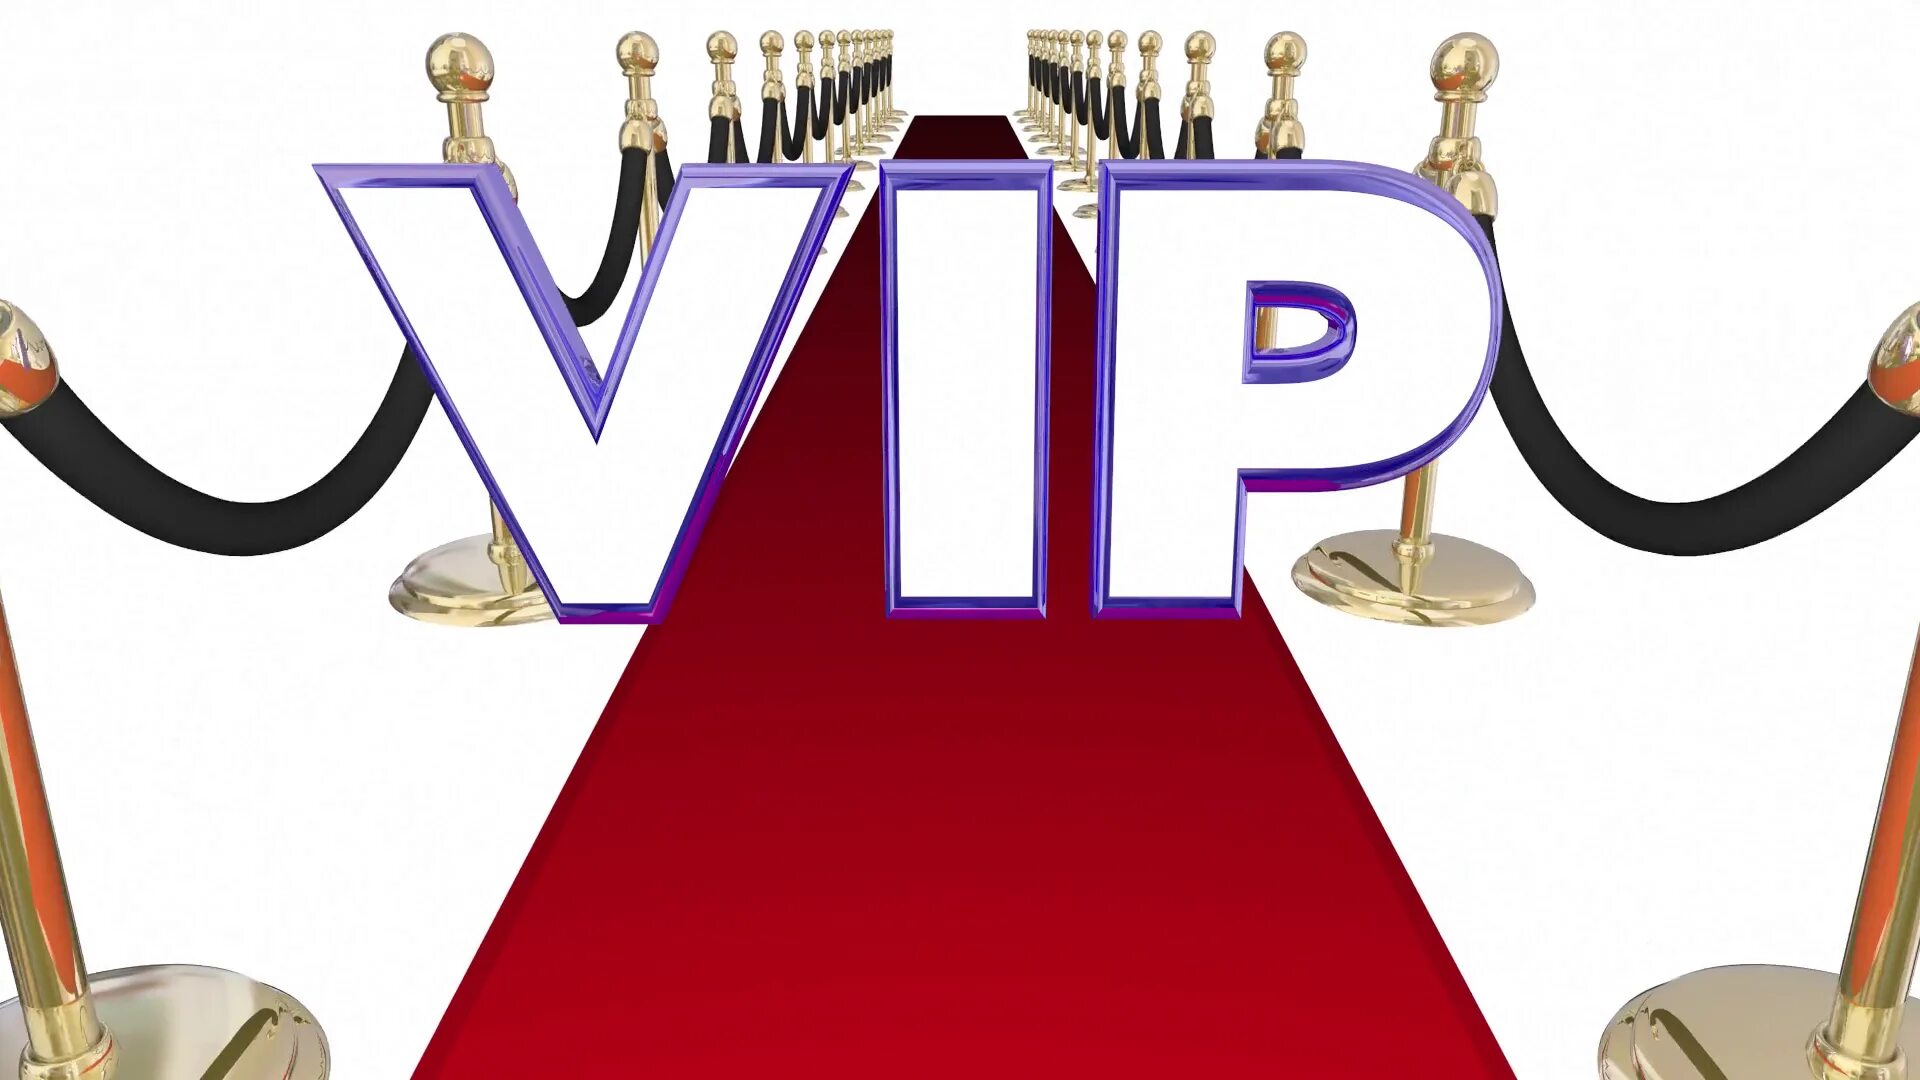 Event 3. Very important person. VIP very important person. VIP английский. Картинки VIP very important person.